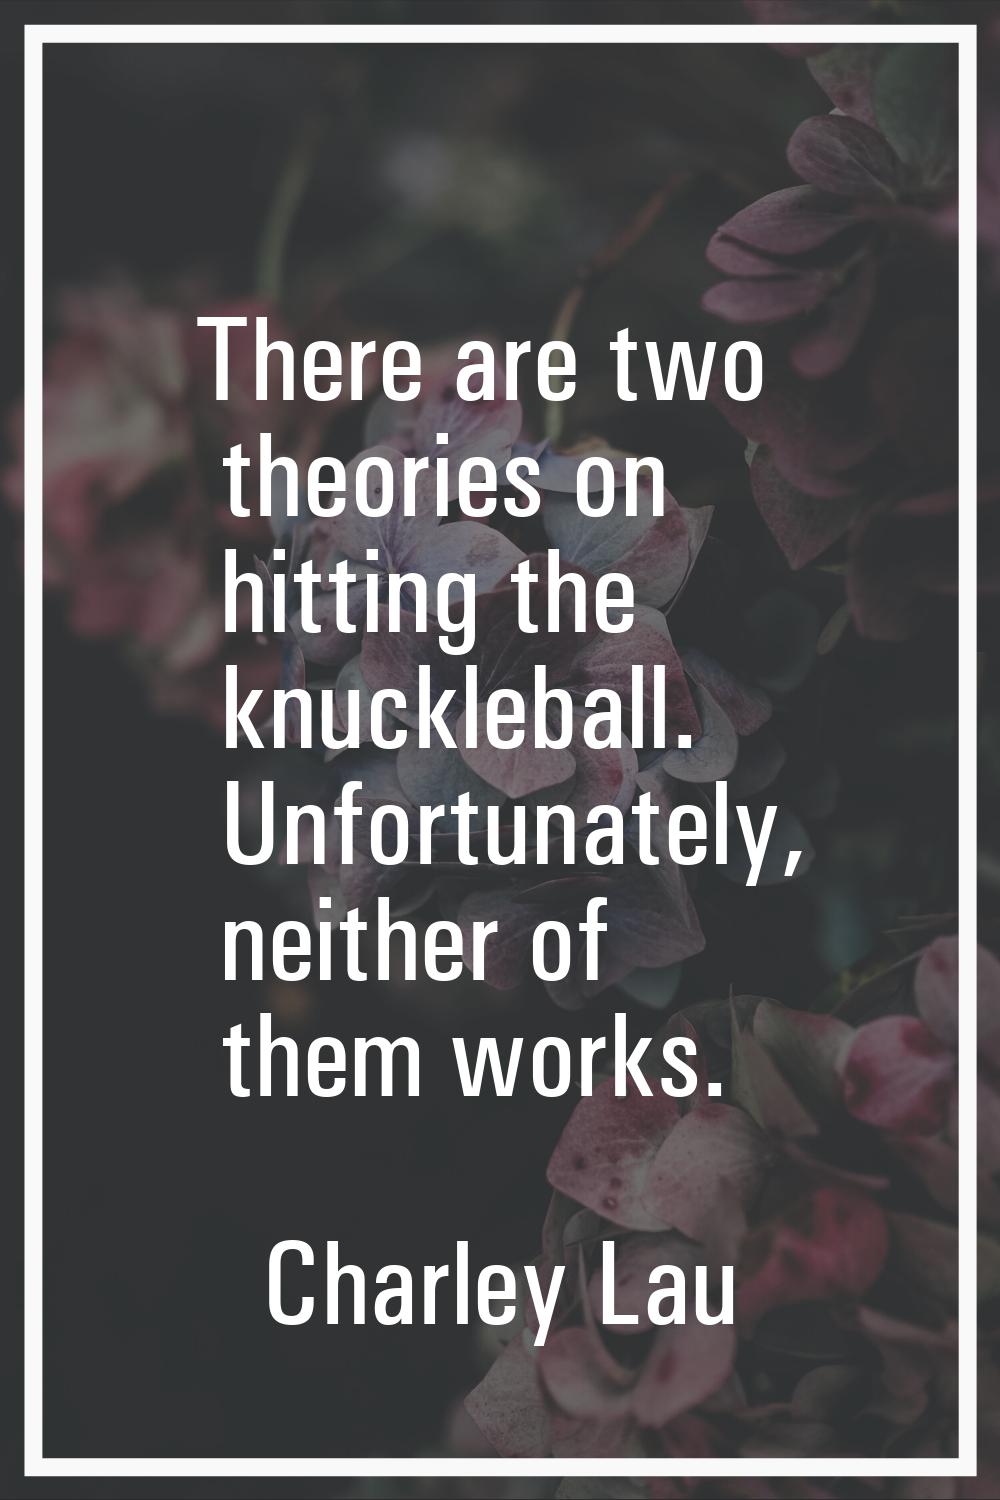 There are two theories on hitting the knuckleball. Unfortunately, neither of them works.